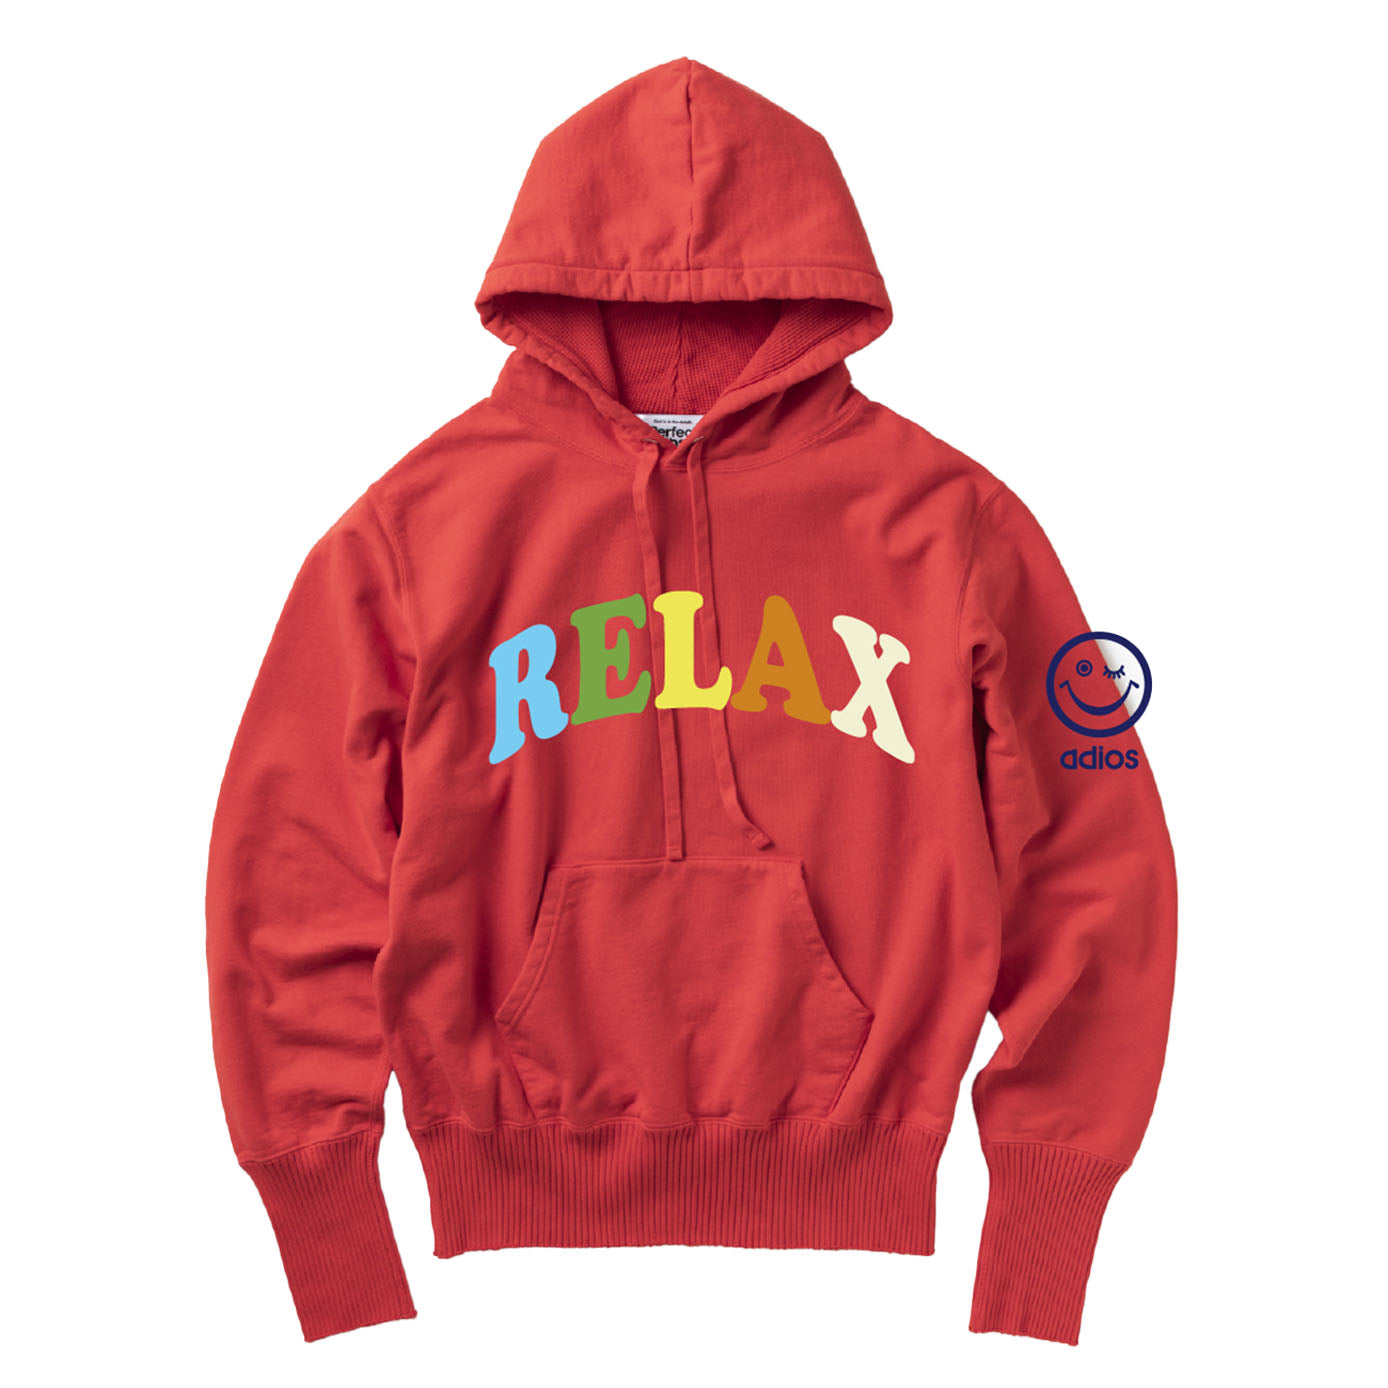 【Perfect ribs®︎×A LOVE MOVEMENT】"RELAX & TAKE IT EASY"Basic Hoodie / Red(ベーシック フーディー/レッド)